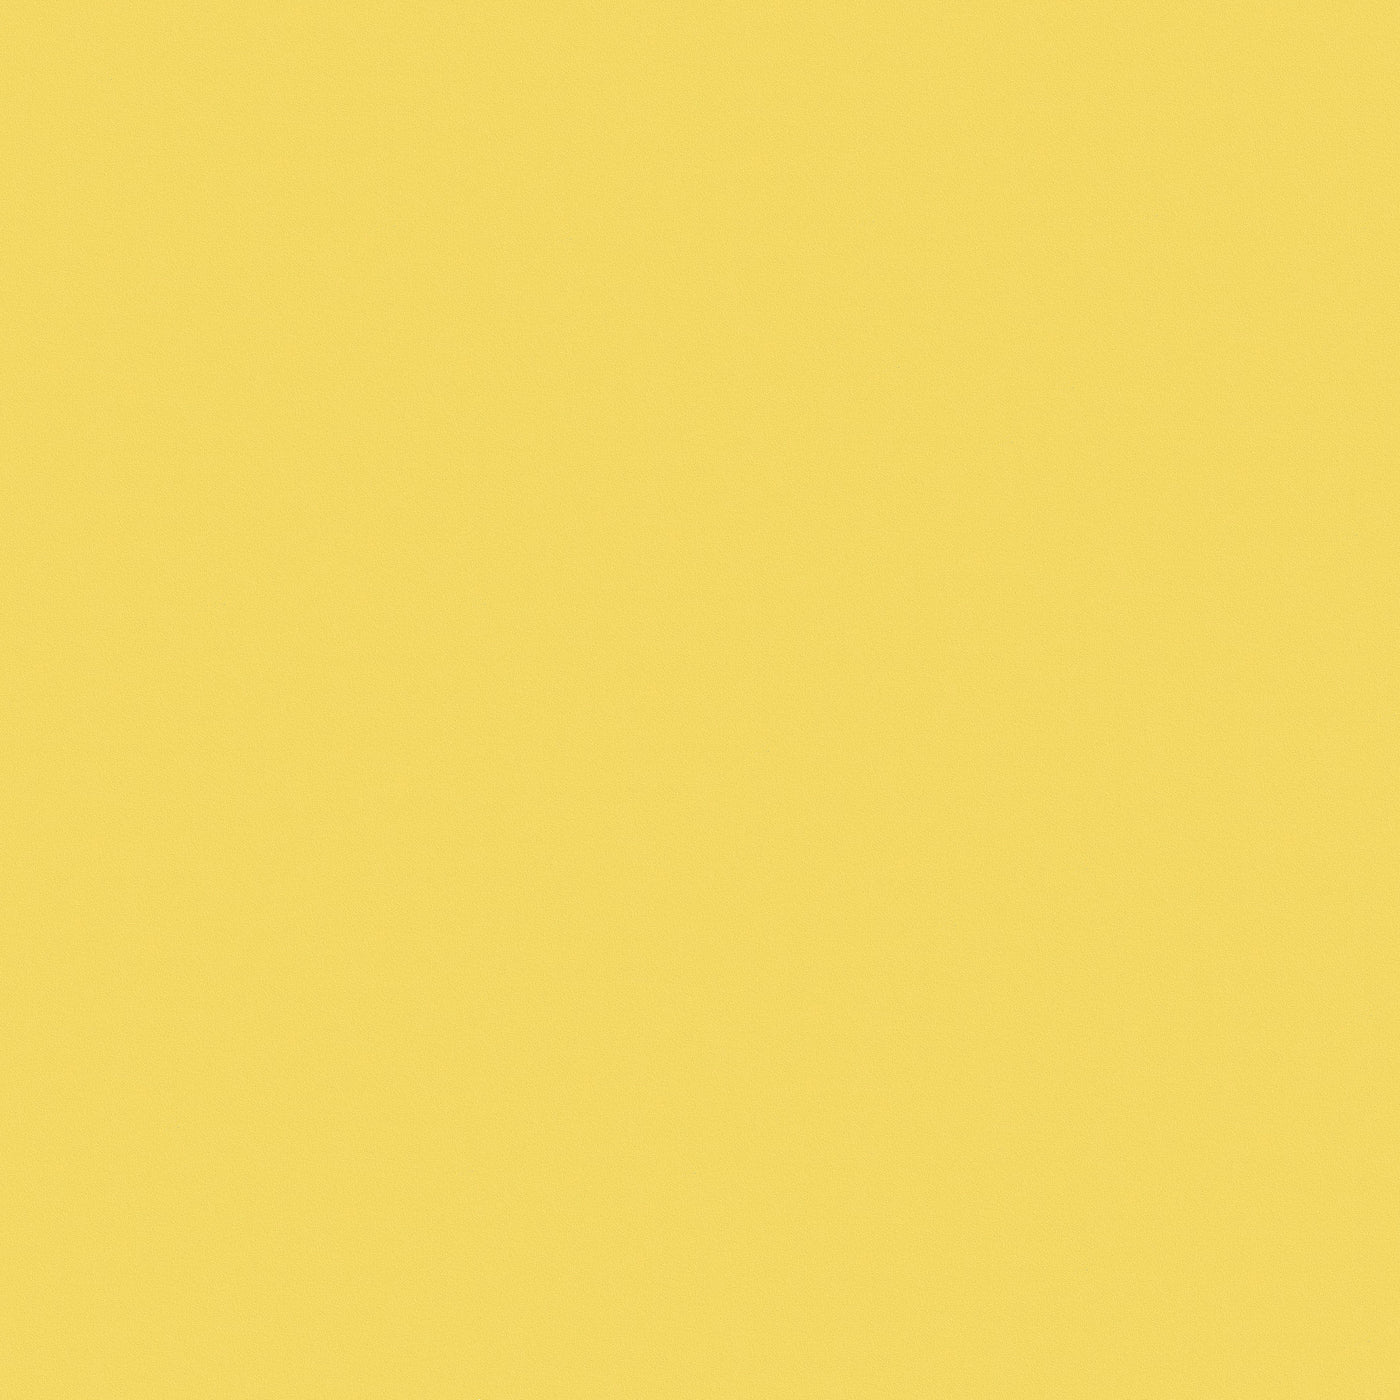 CANARY - bright yellow 12x12 smooth cardstock made for cutting machines by Lessebo Paper